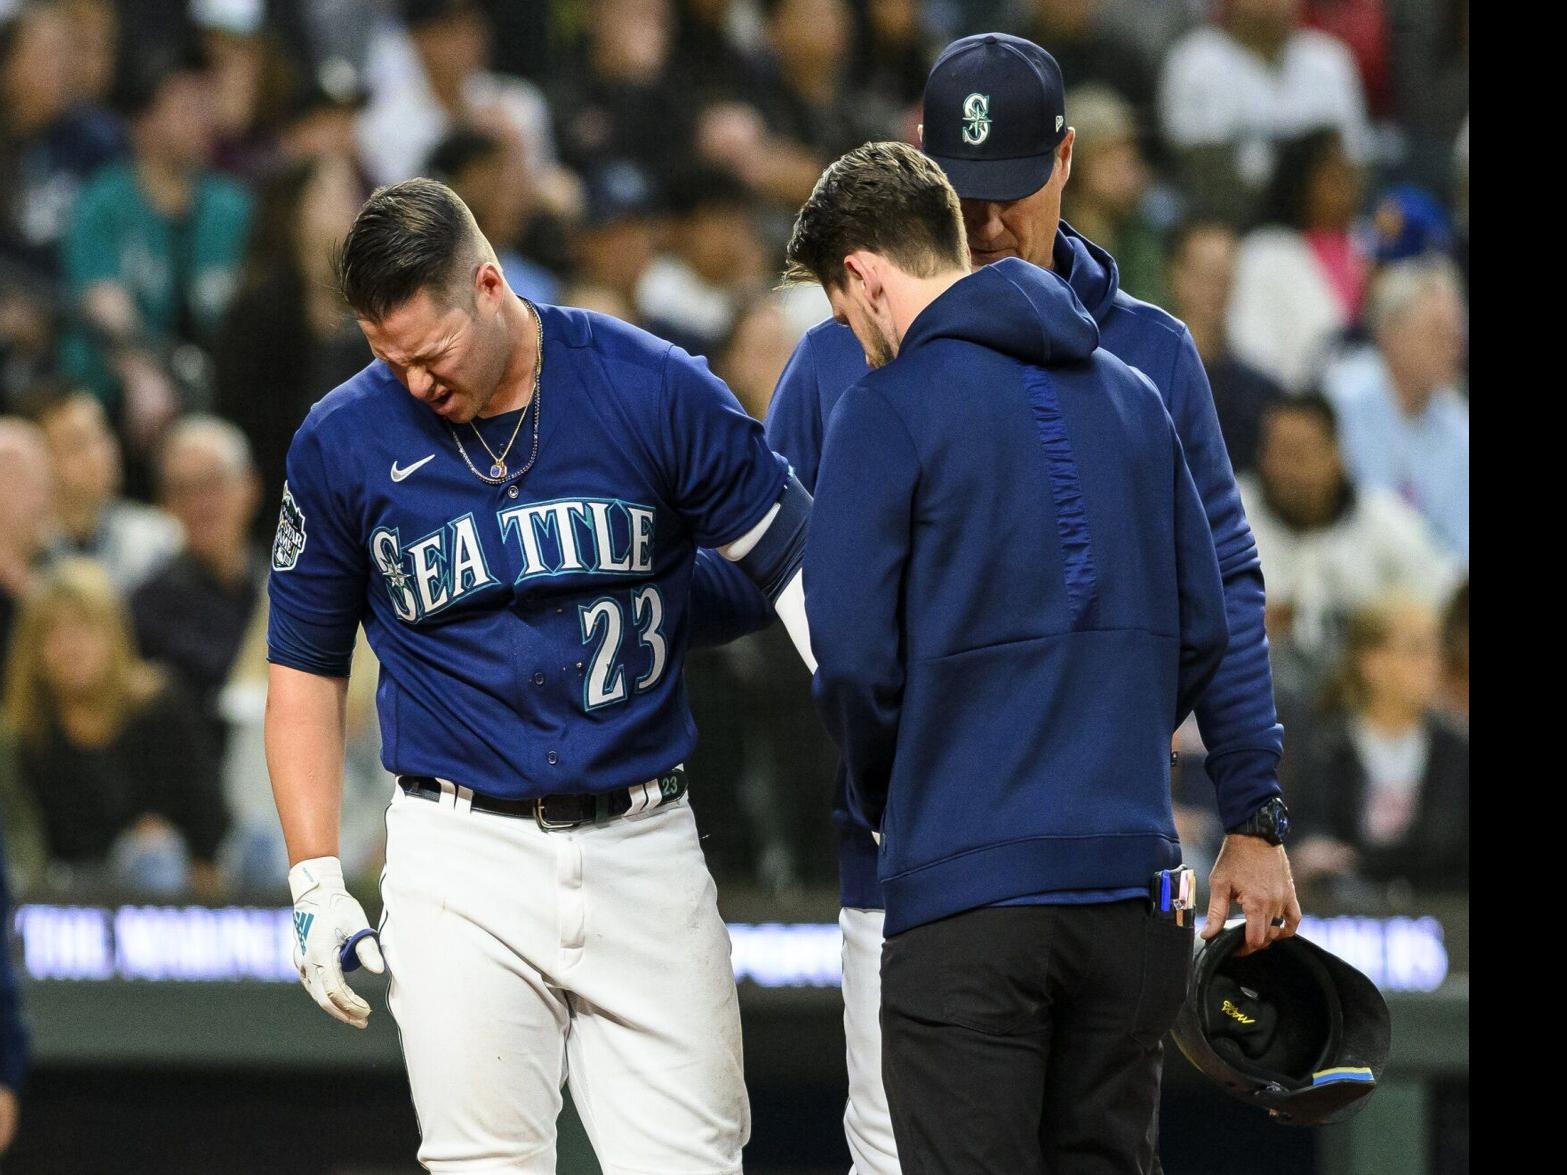 Ty France sits day after getting hit by pitch, but says 'I got lucky', Mariners